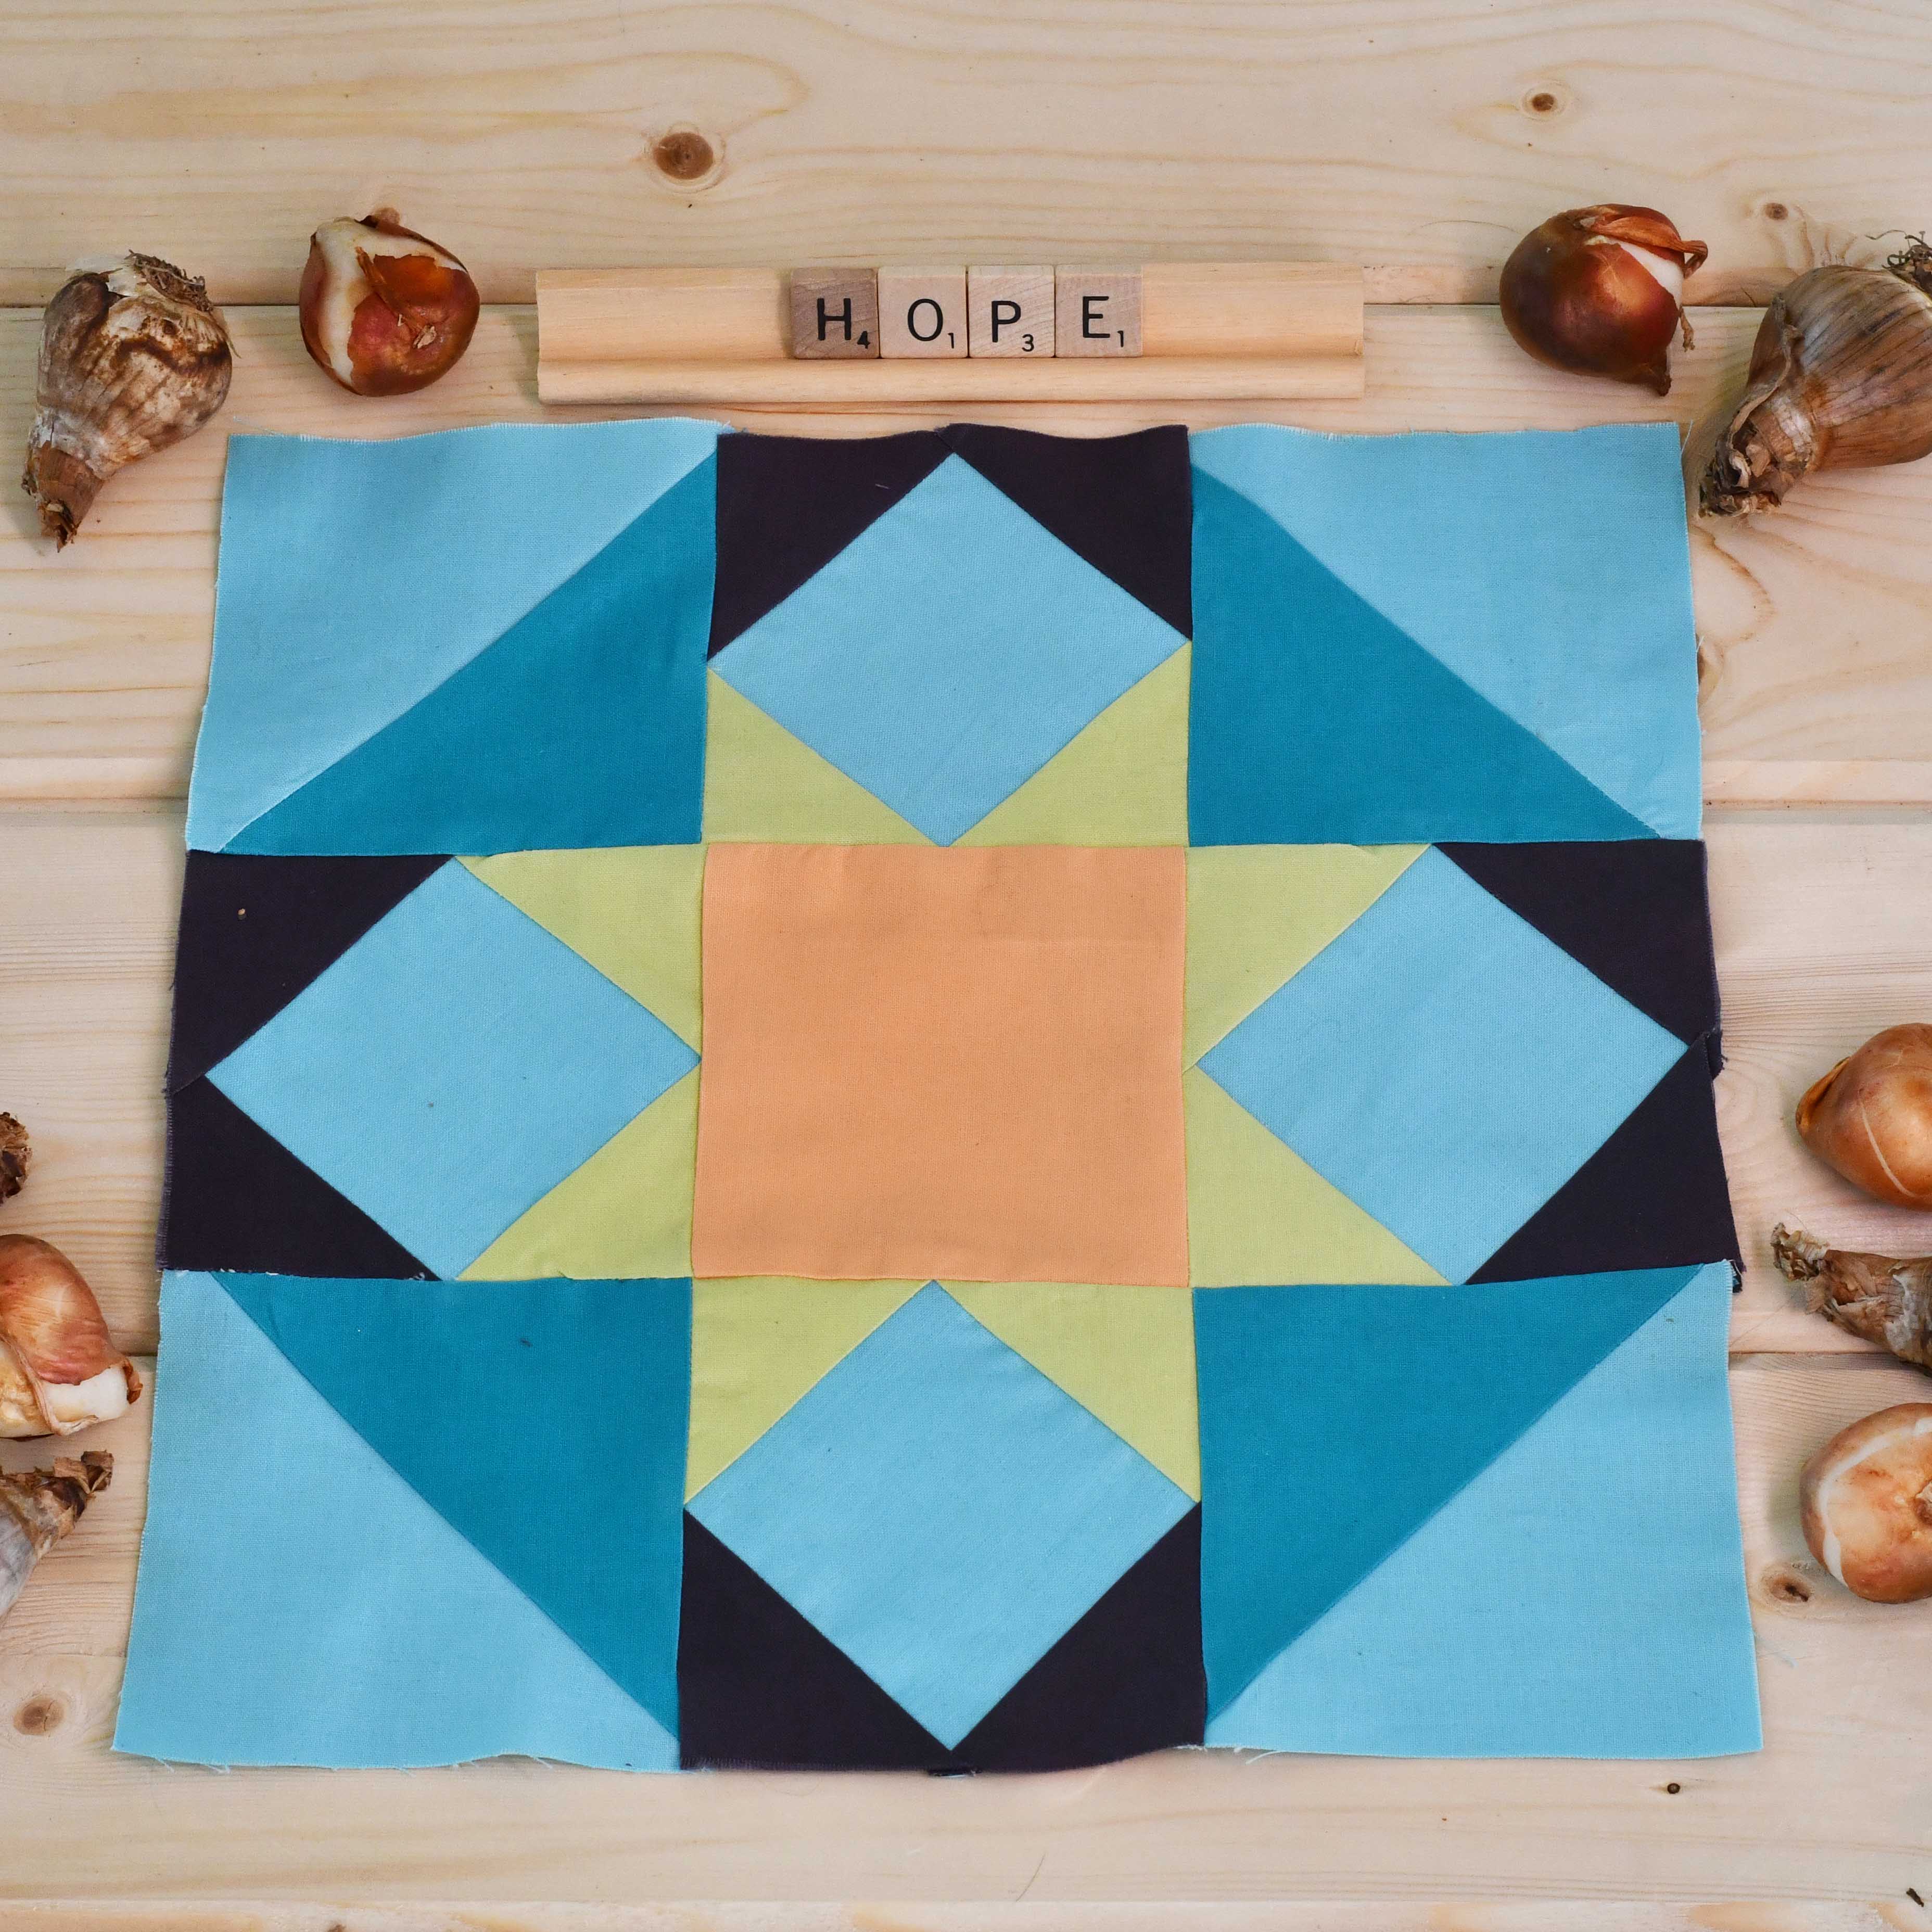 Feeling Hope? Hope Challenge Quilt Block from the Live Well Live Strong Quilt available exclusively at Stitches Quilting.